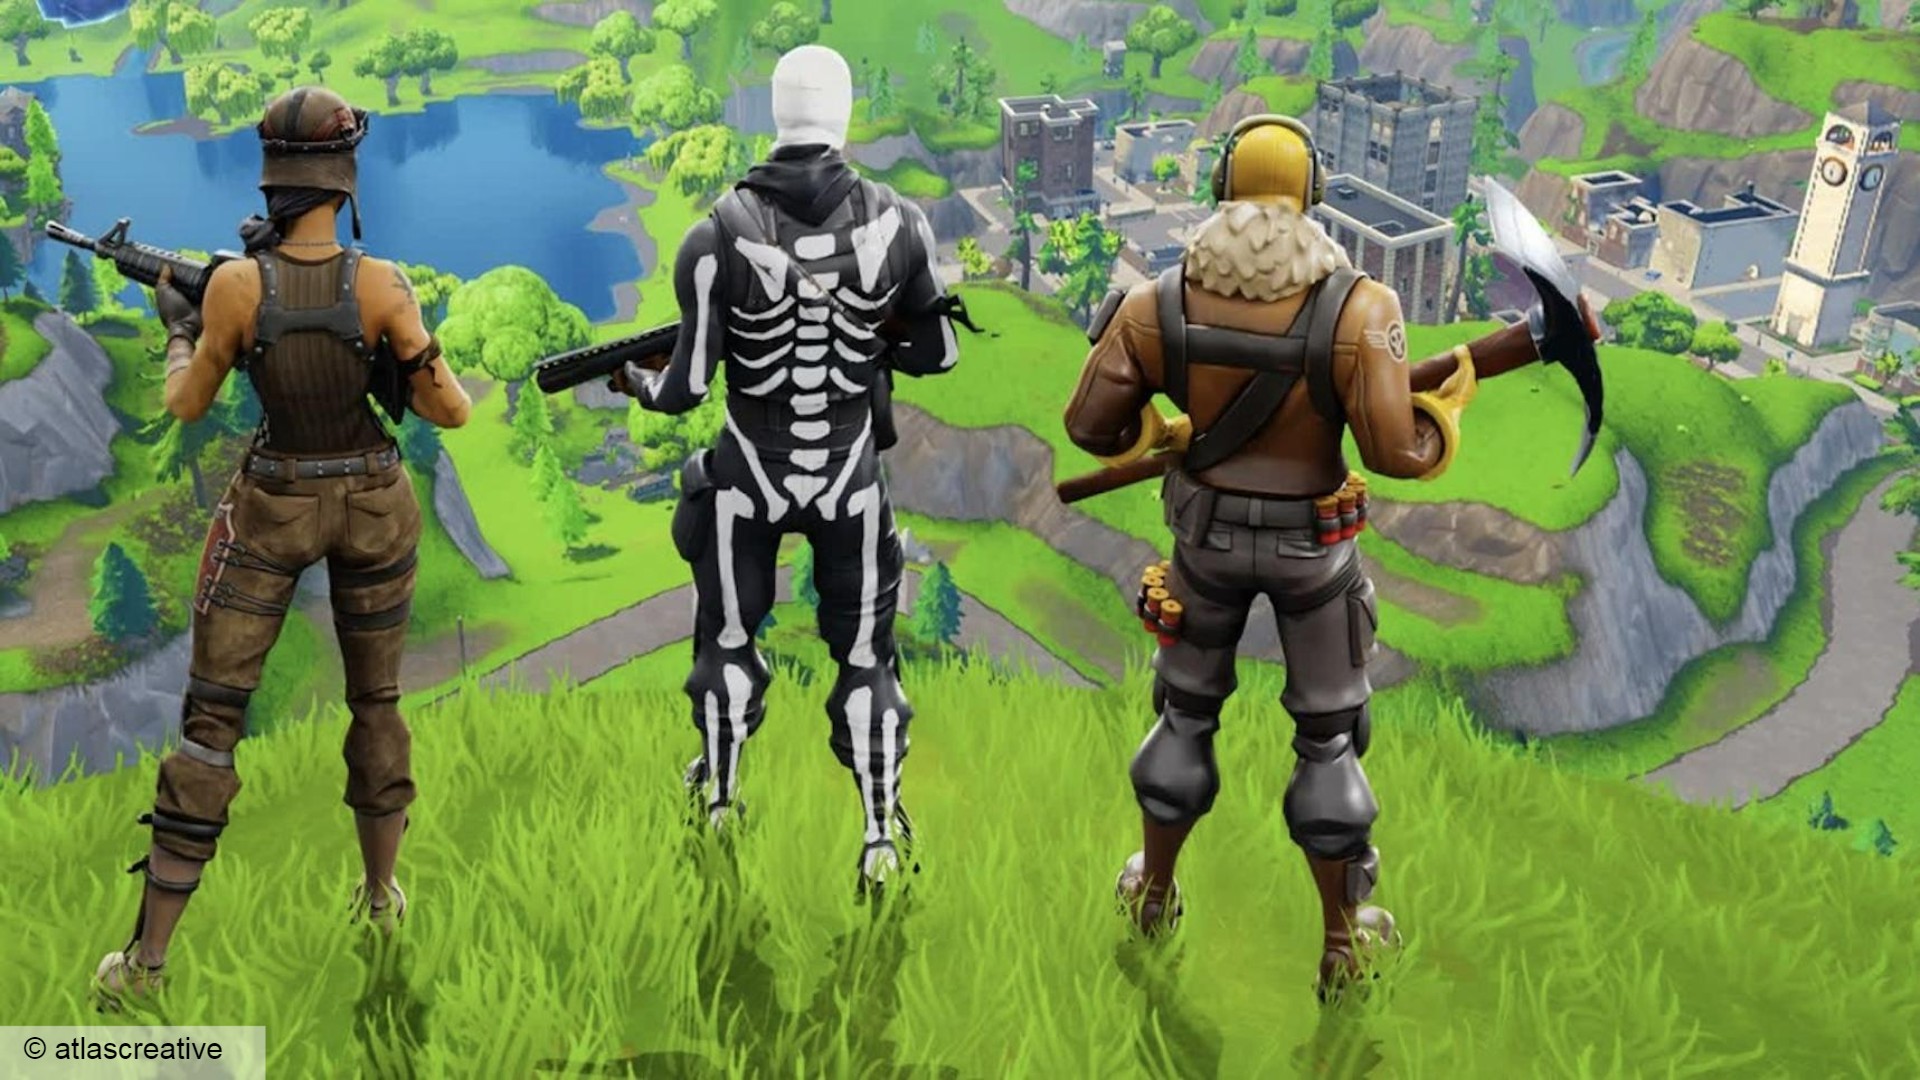 The original Fortnite map is already playable – you don’t have to wait